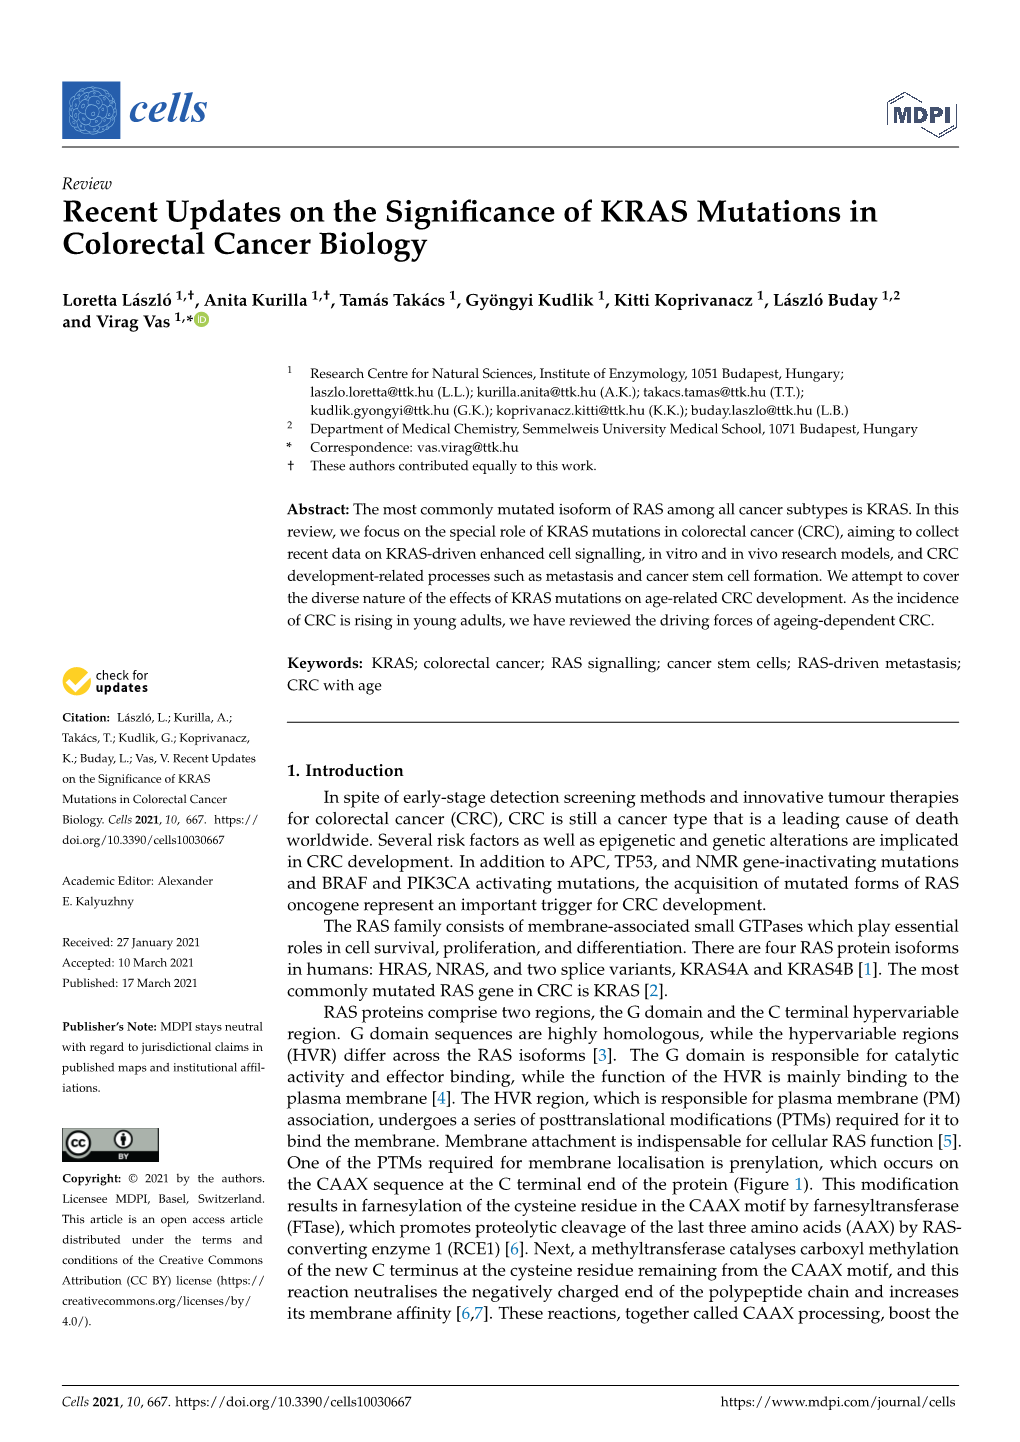 Recent Updates on the Significance of KRAS Mutations in Colorectal